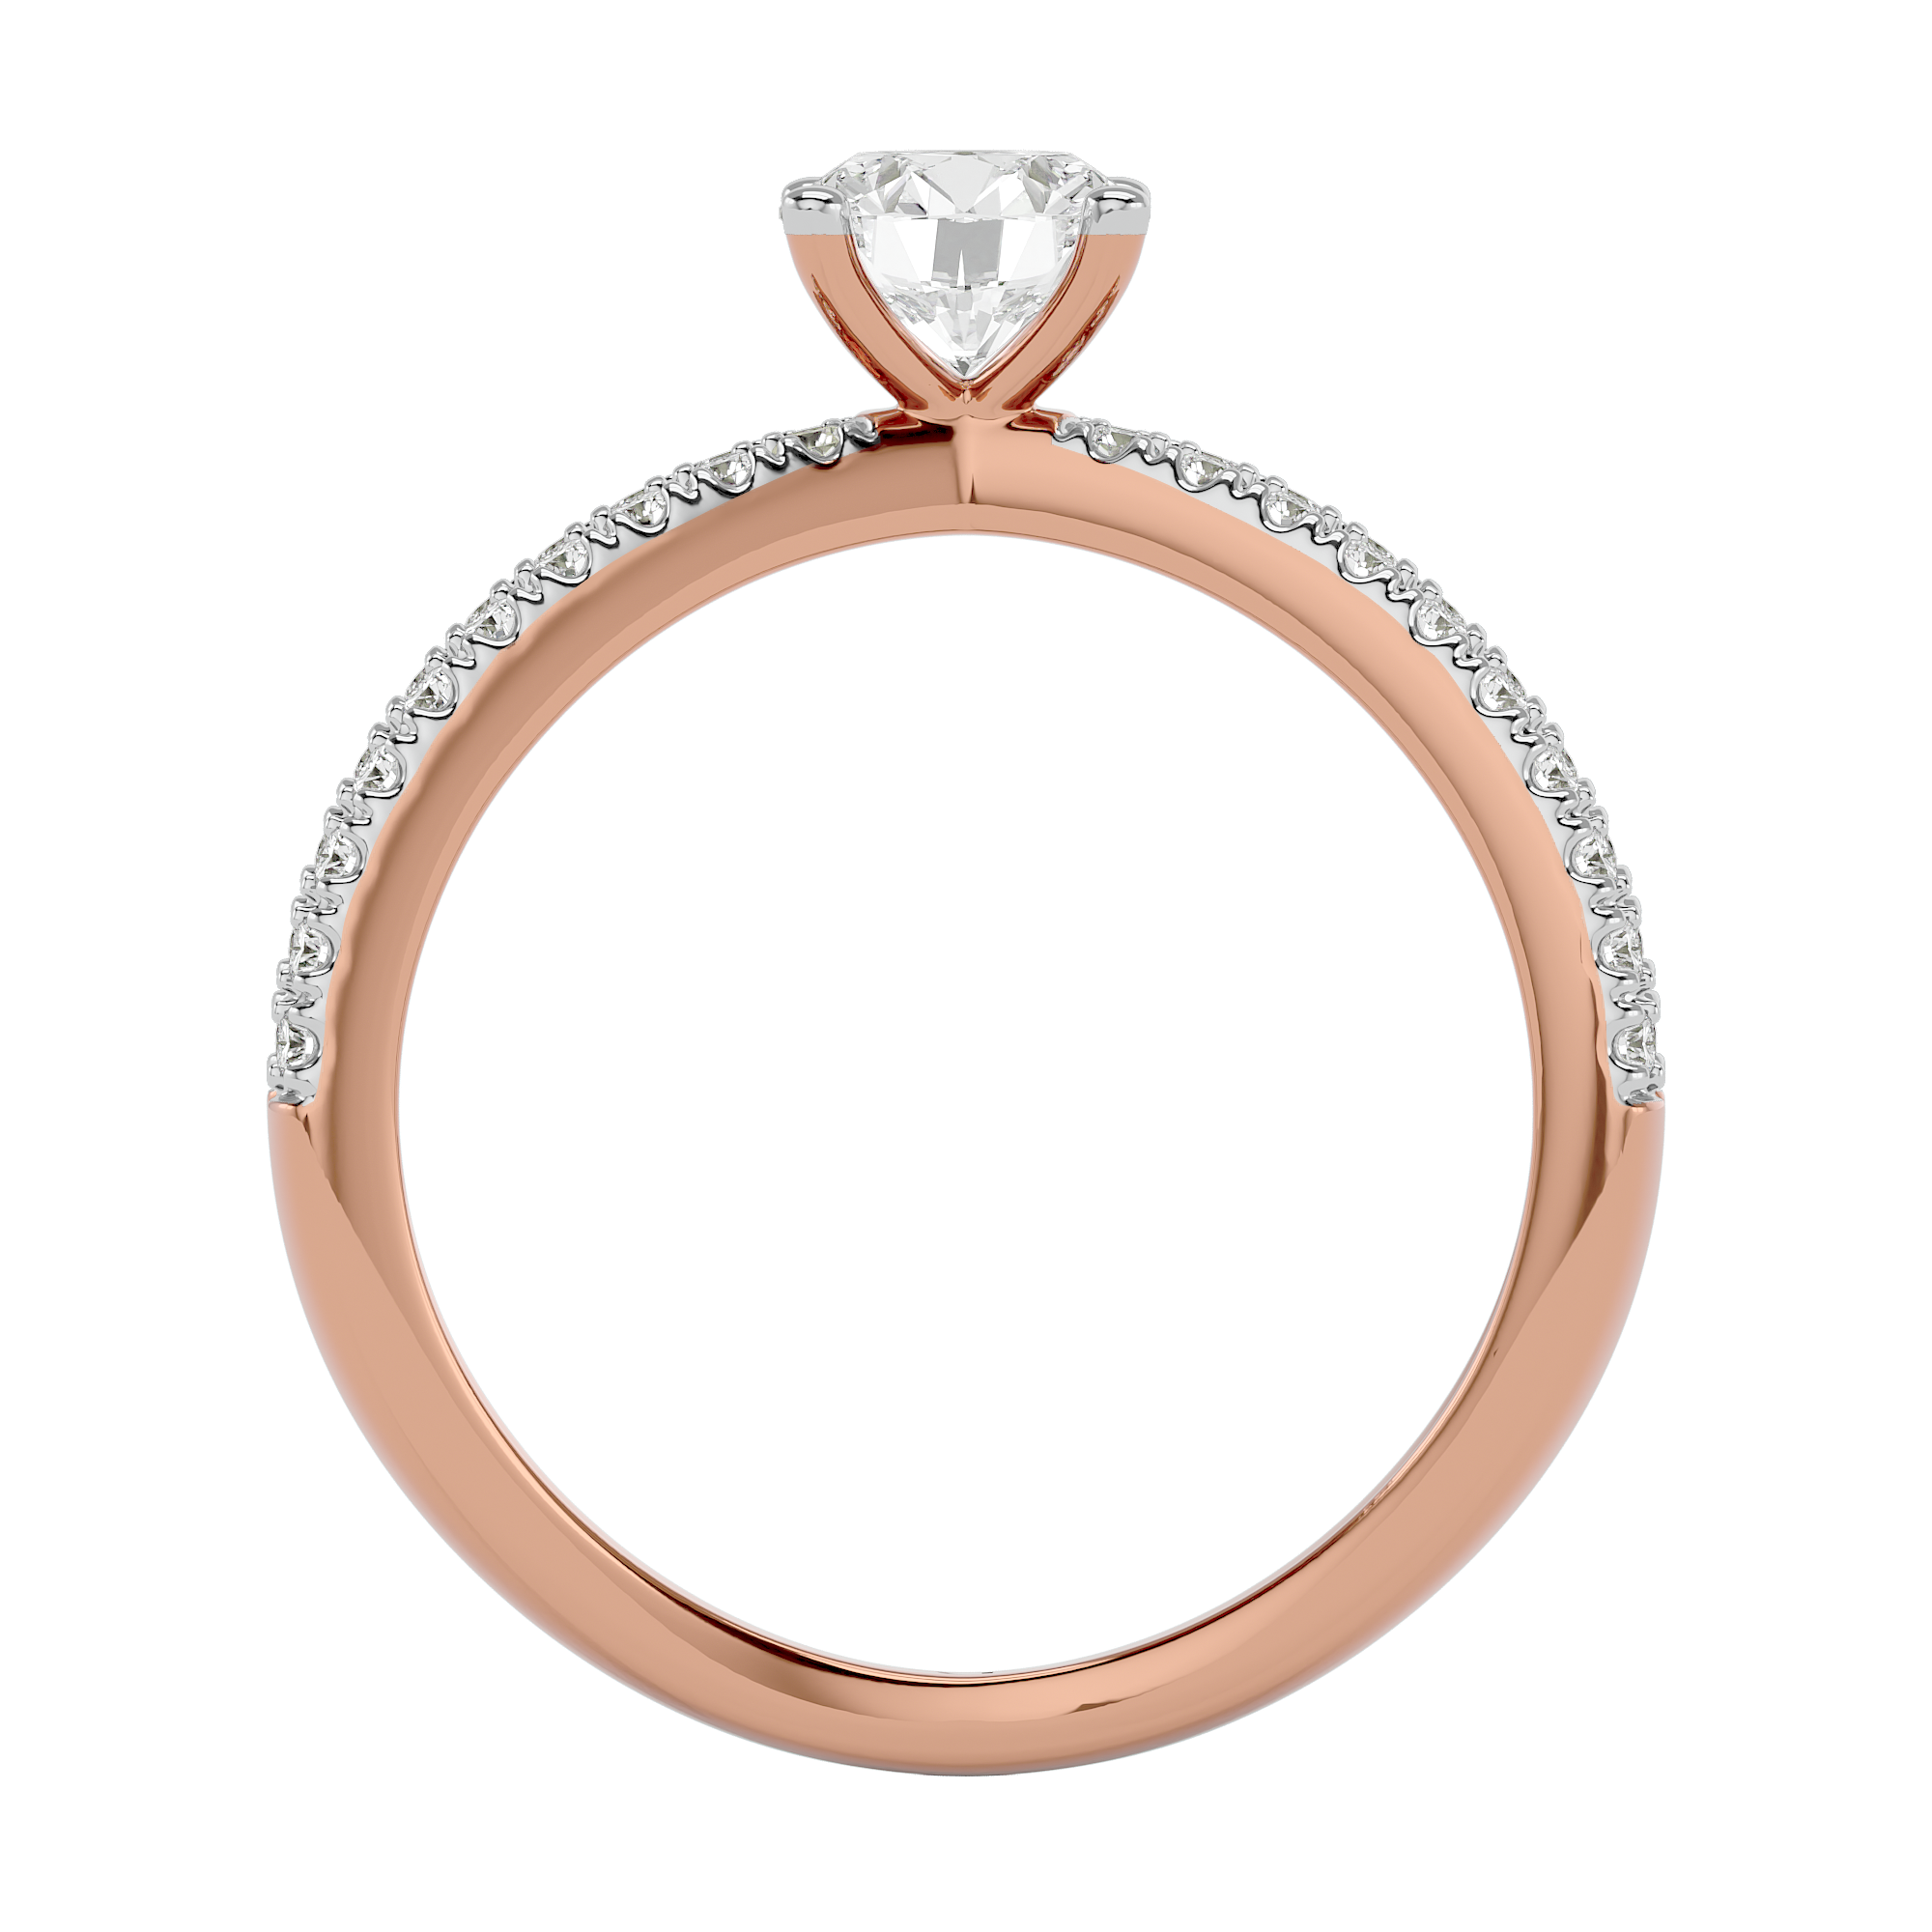 0.75 Ct Solitaire Diamond Ring in 14Kt Rose Gold - Blu Diamonds